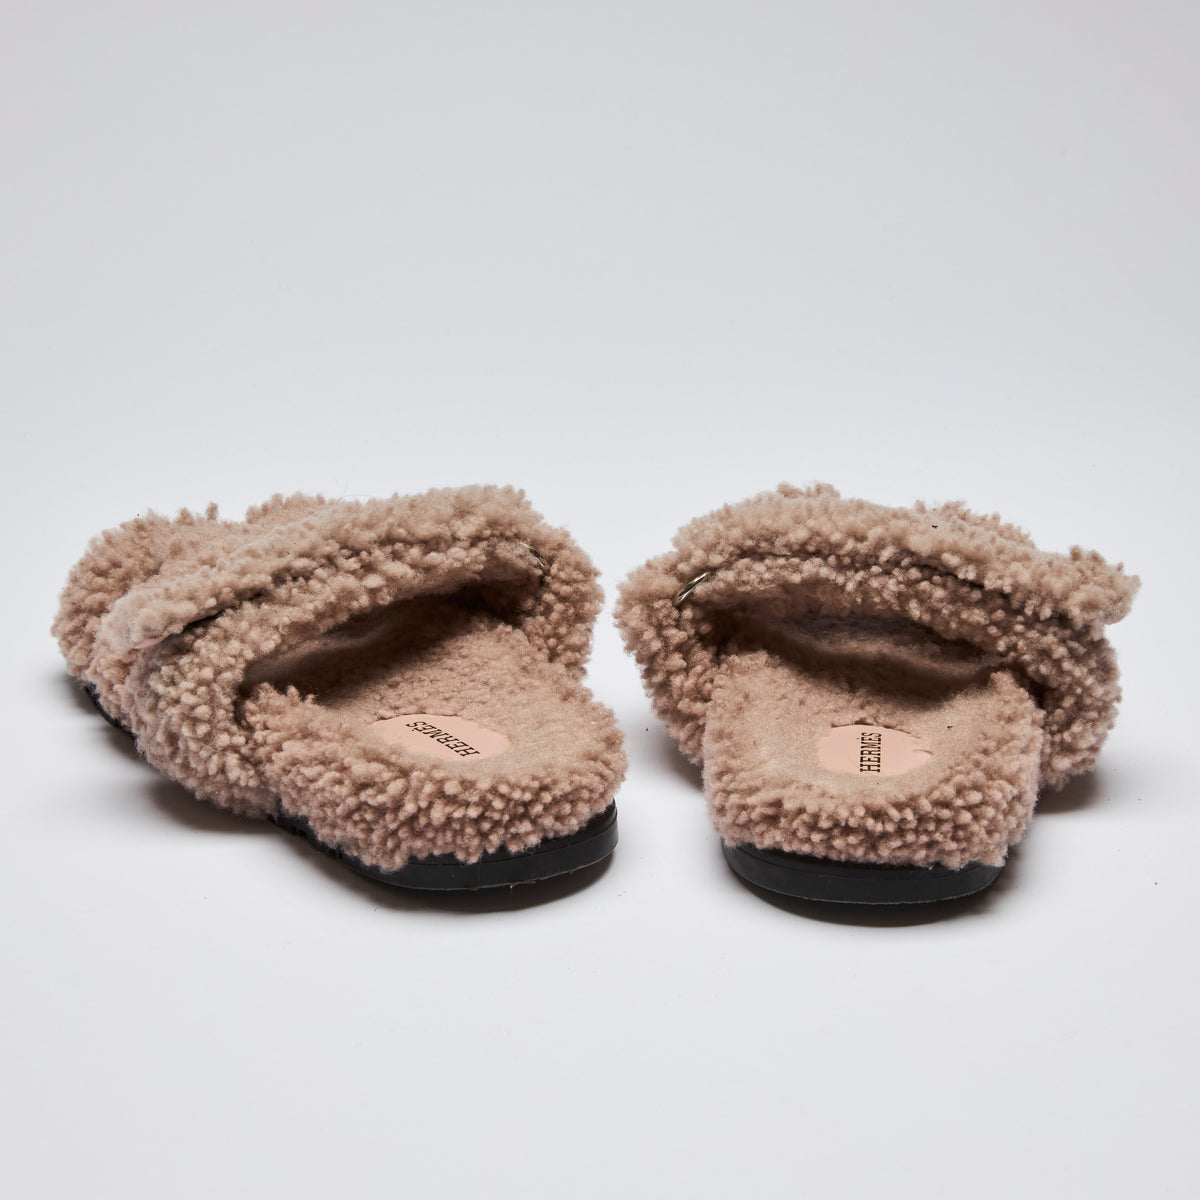 Pre-Loved Dusty Pink Shearling Teddy Sandals with Velcro Strap. (back)